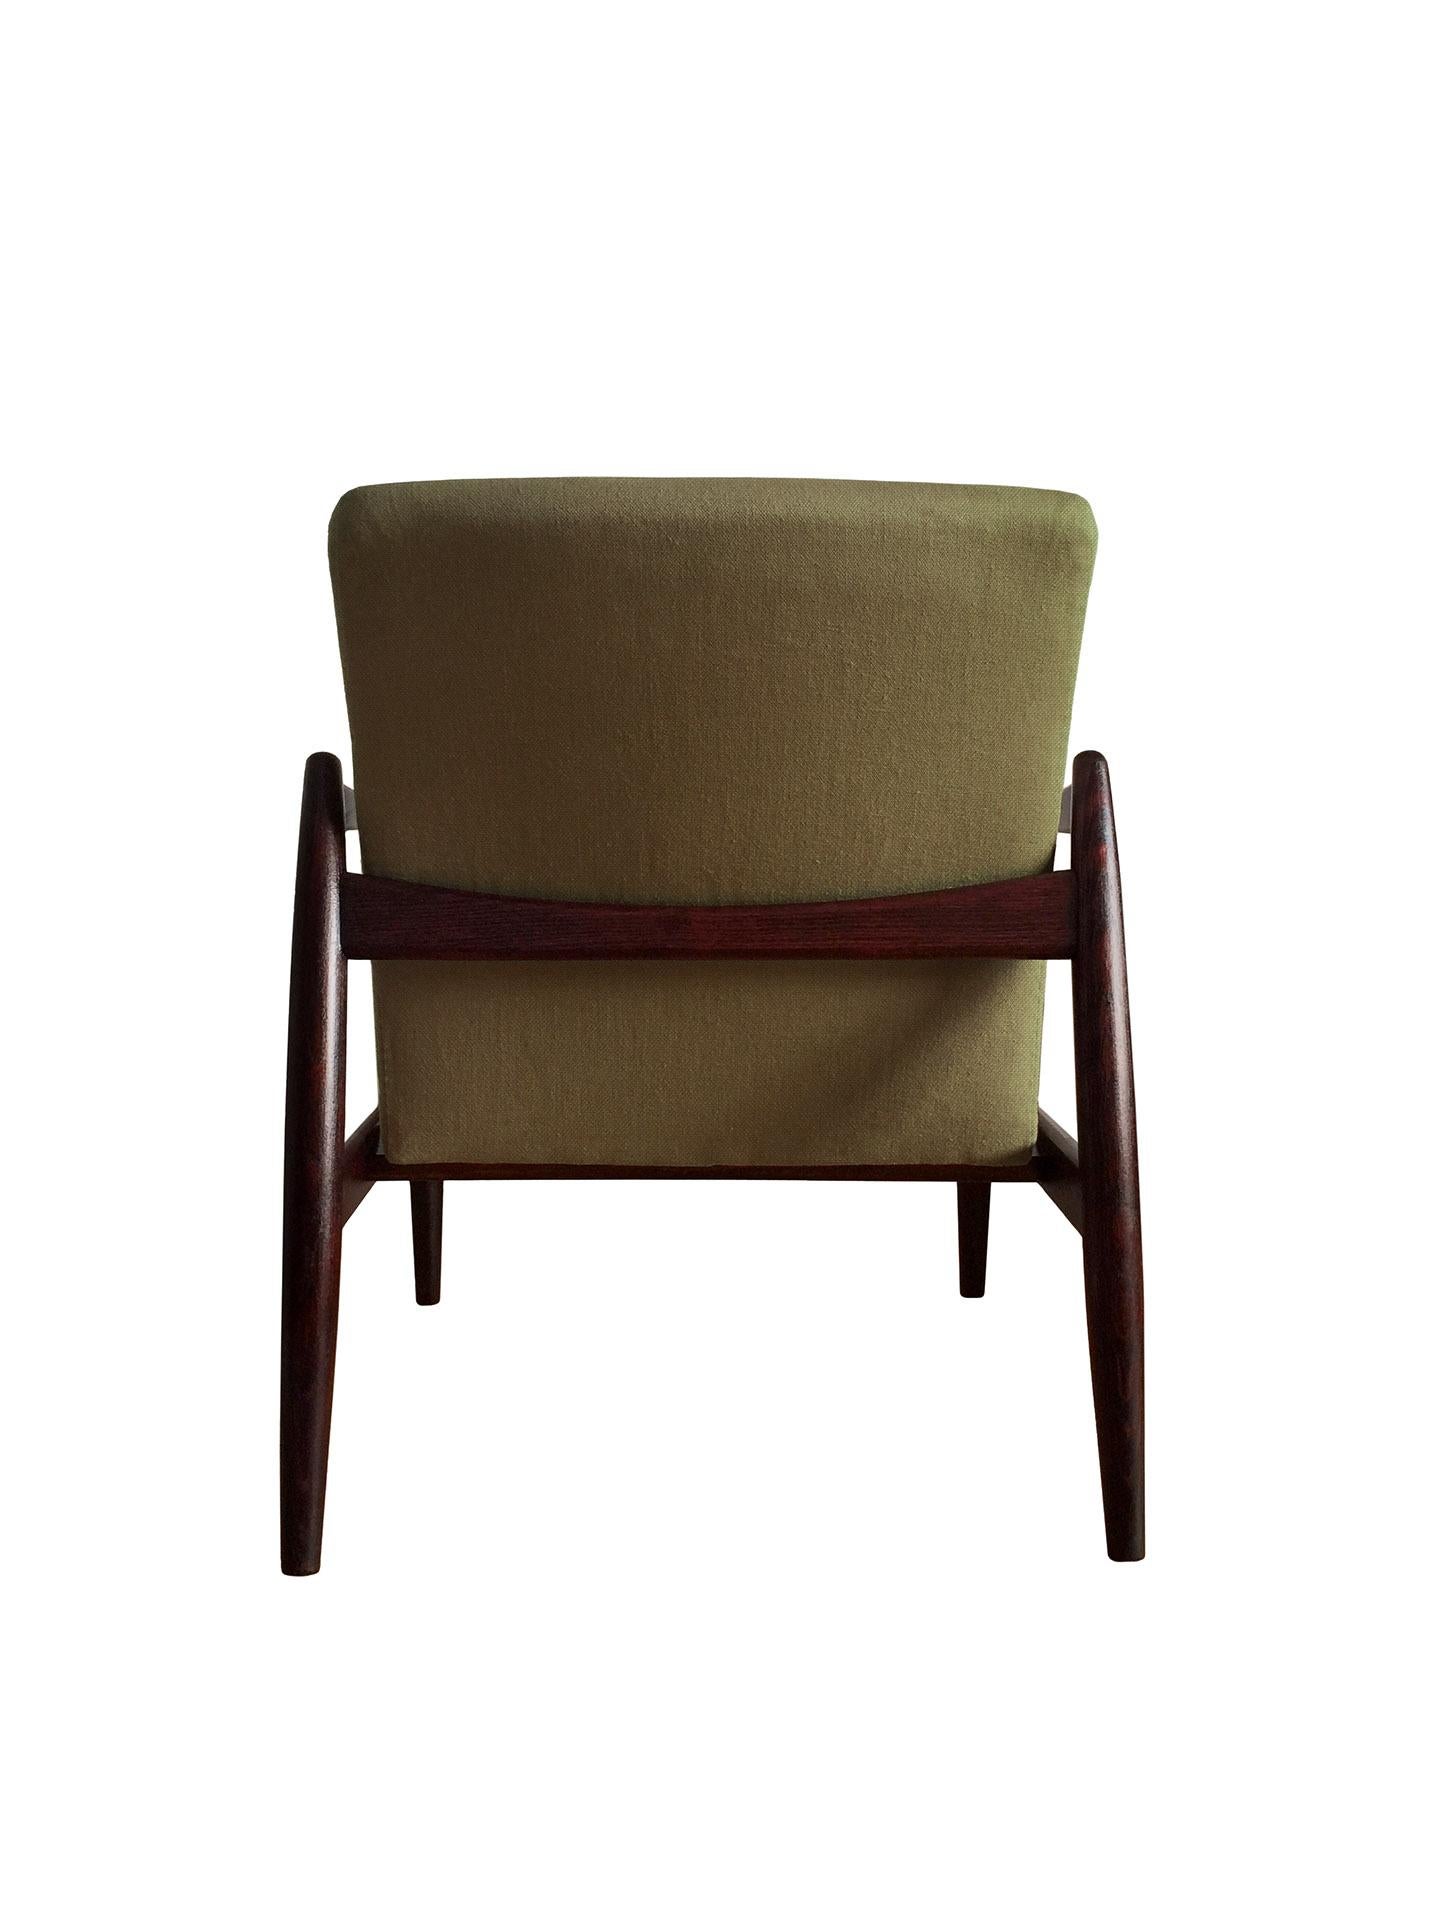 Hand-Crafted Pair of Armchairs, Olive Linen, Edmund Homa, 1960s For Sale